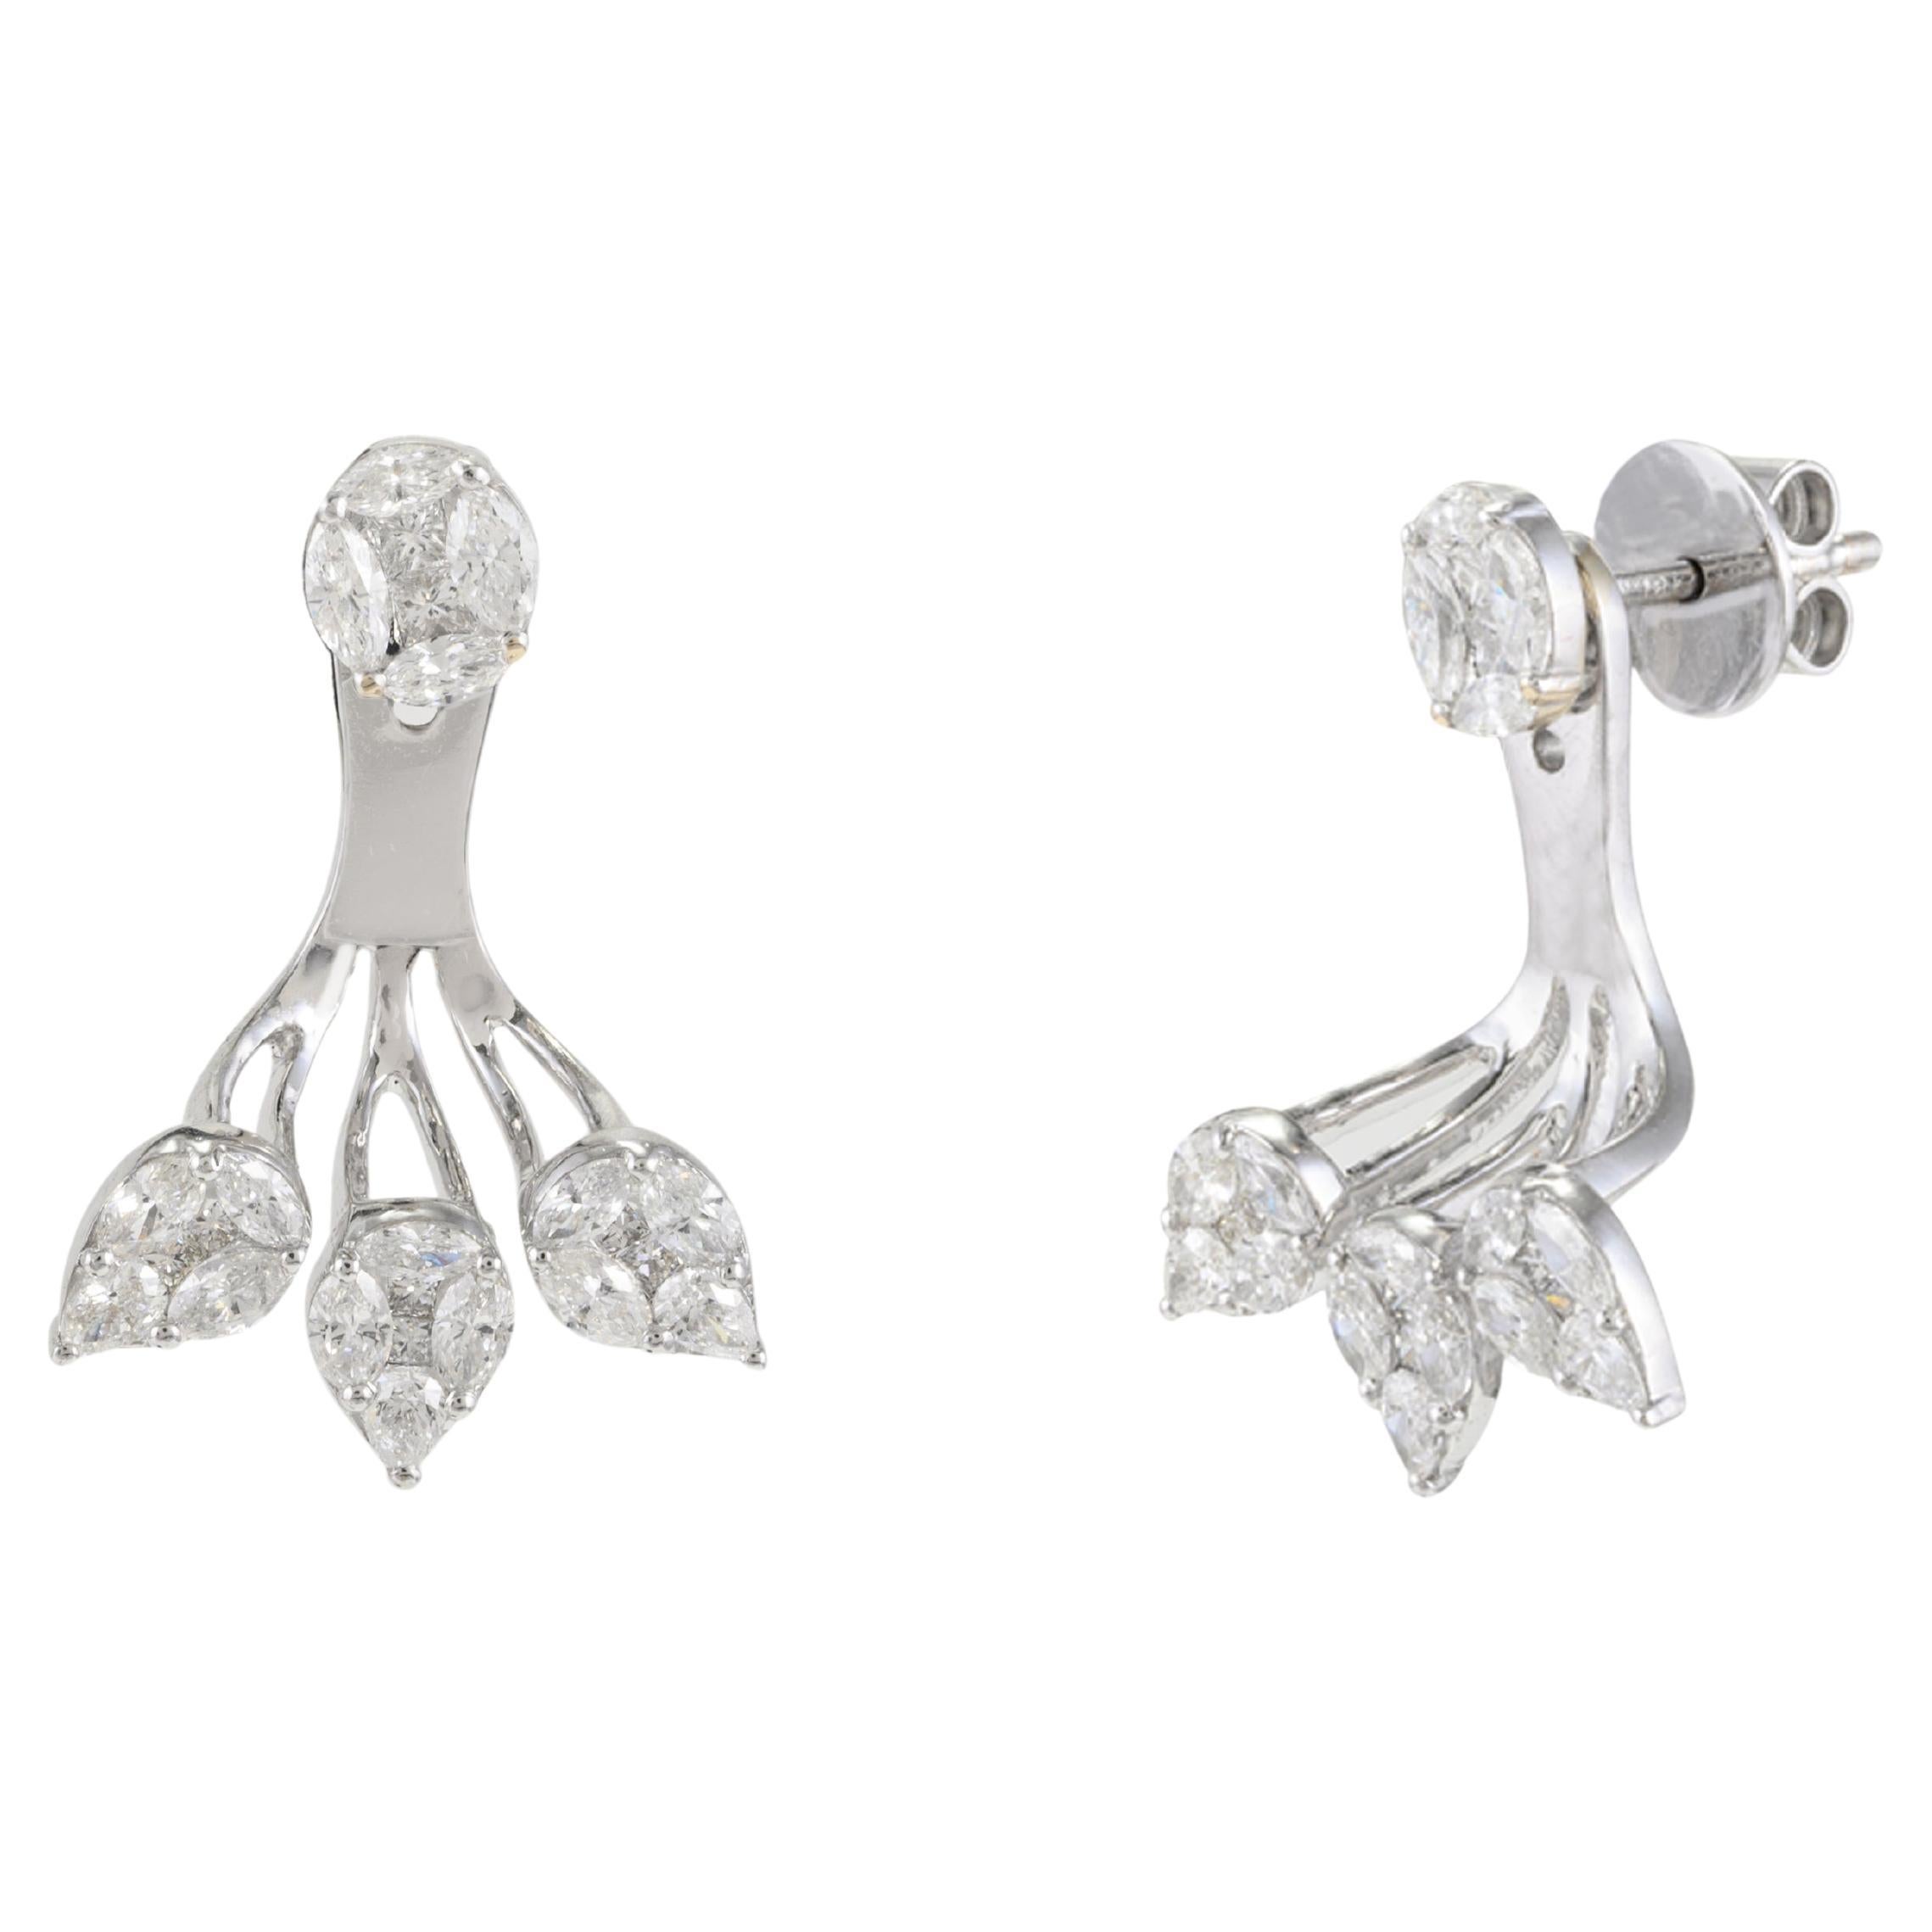 Unique 1.34 Carat Natural Diamond Ear Jacket Earrings in 18K Solid White Gold For Sale